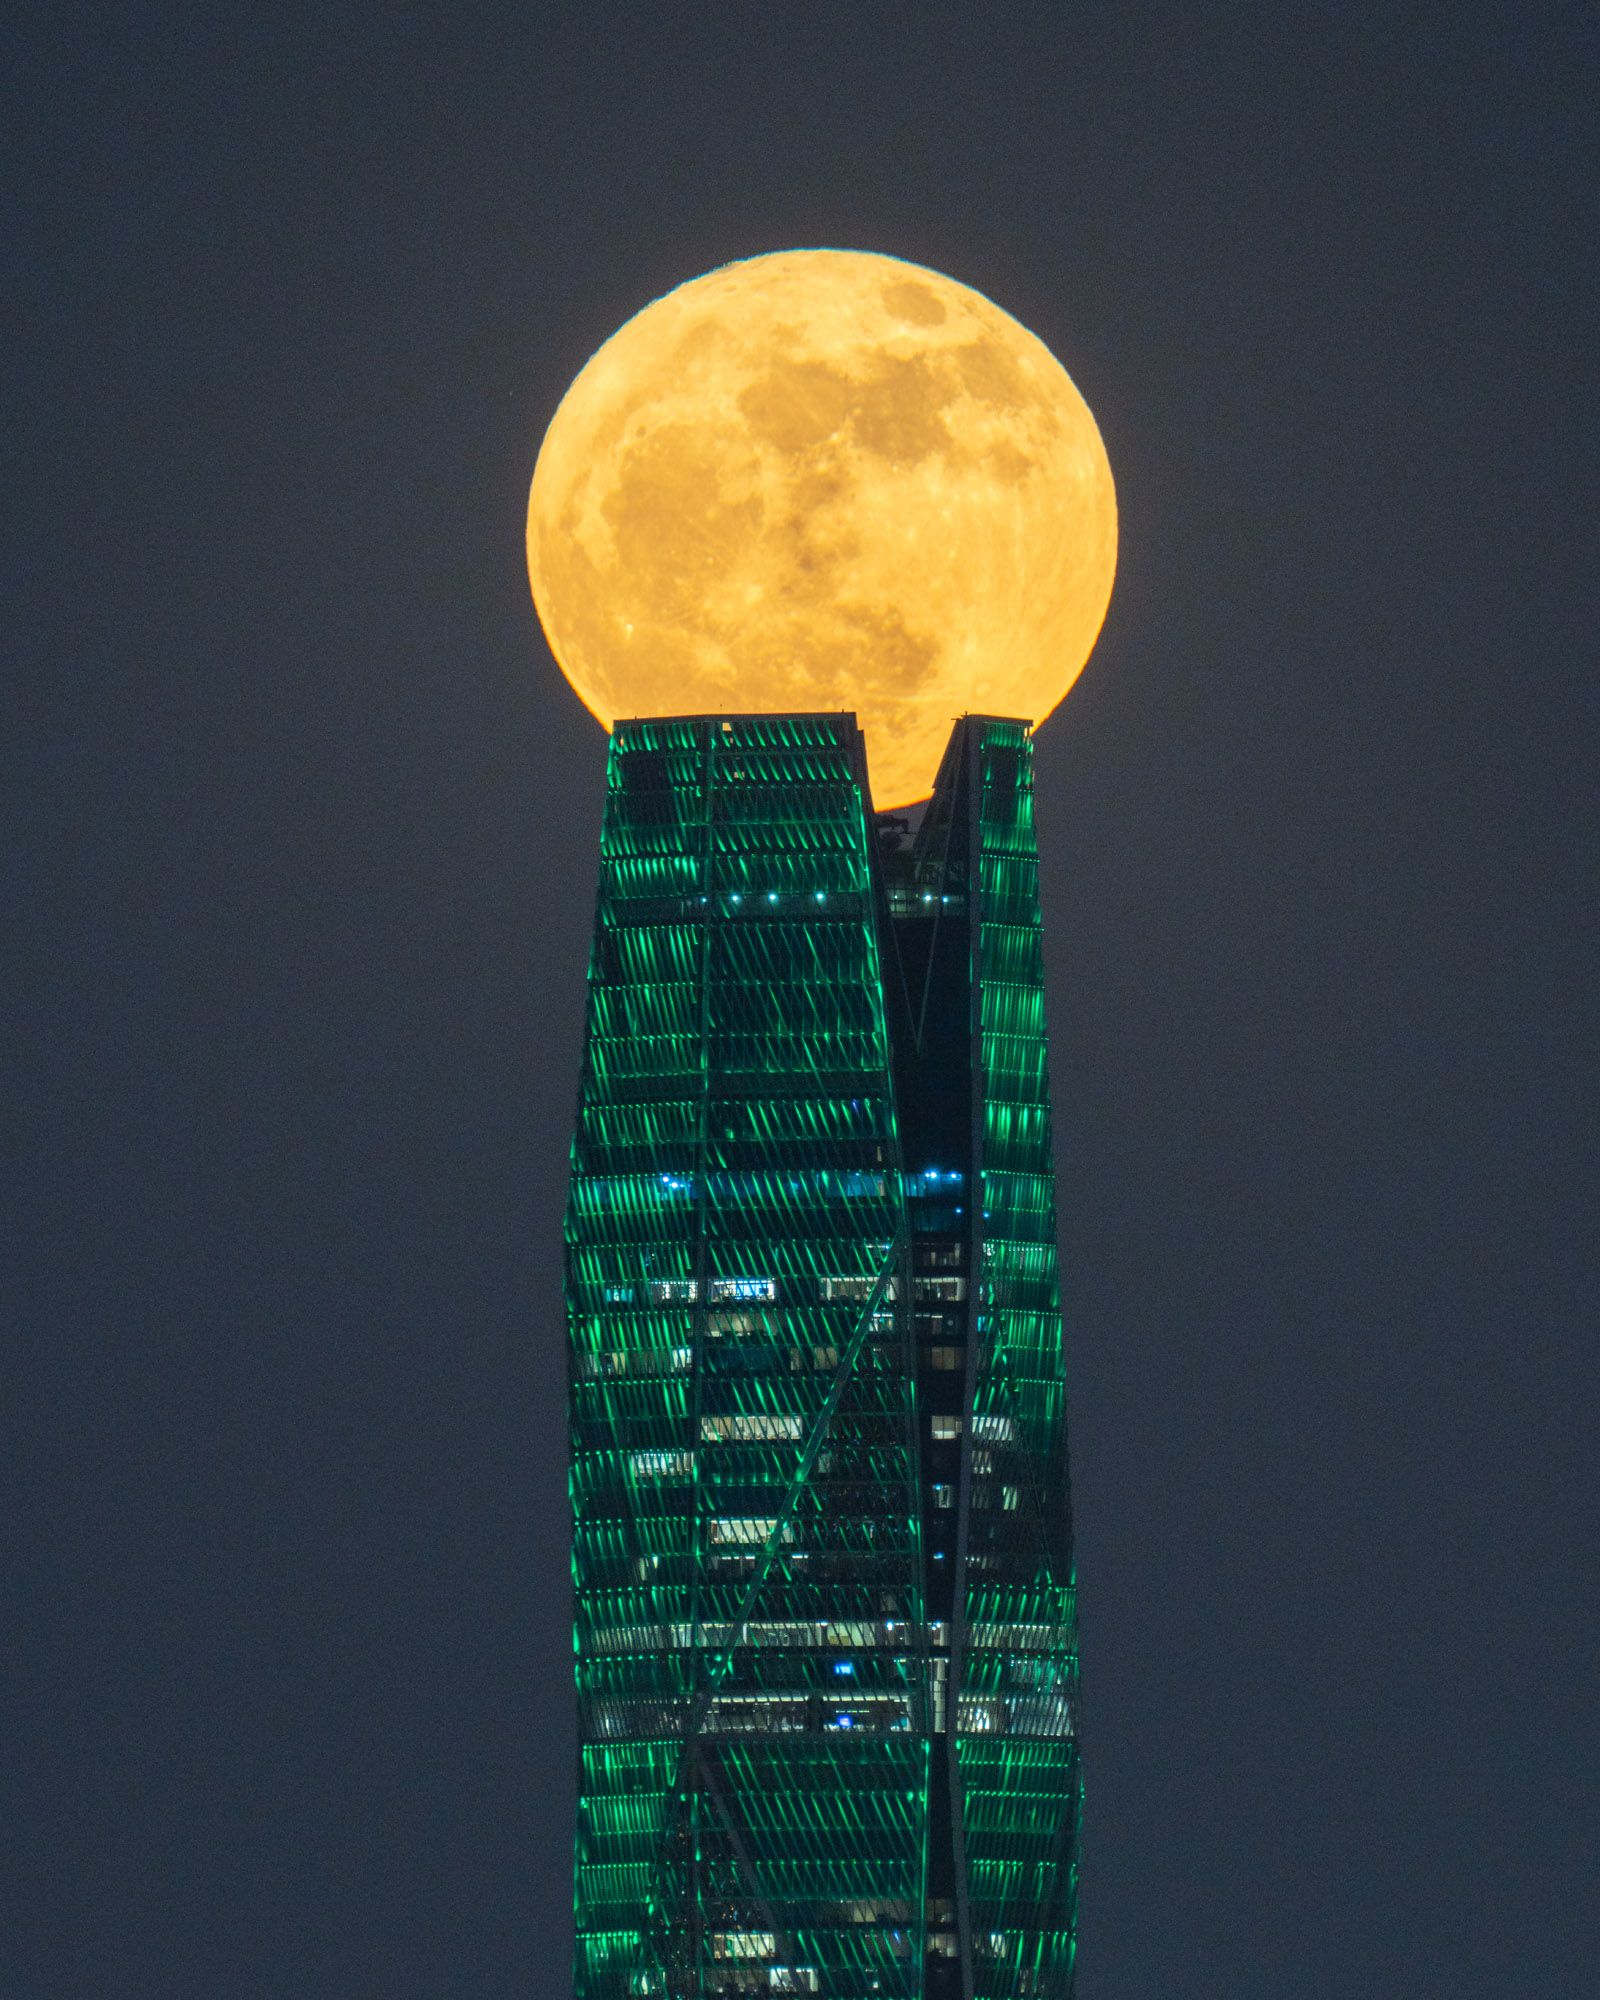 A full moon looks like it's resting on a tall building